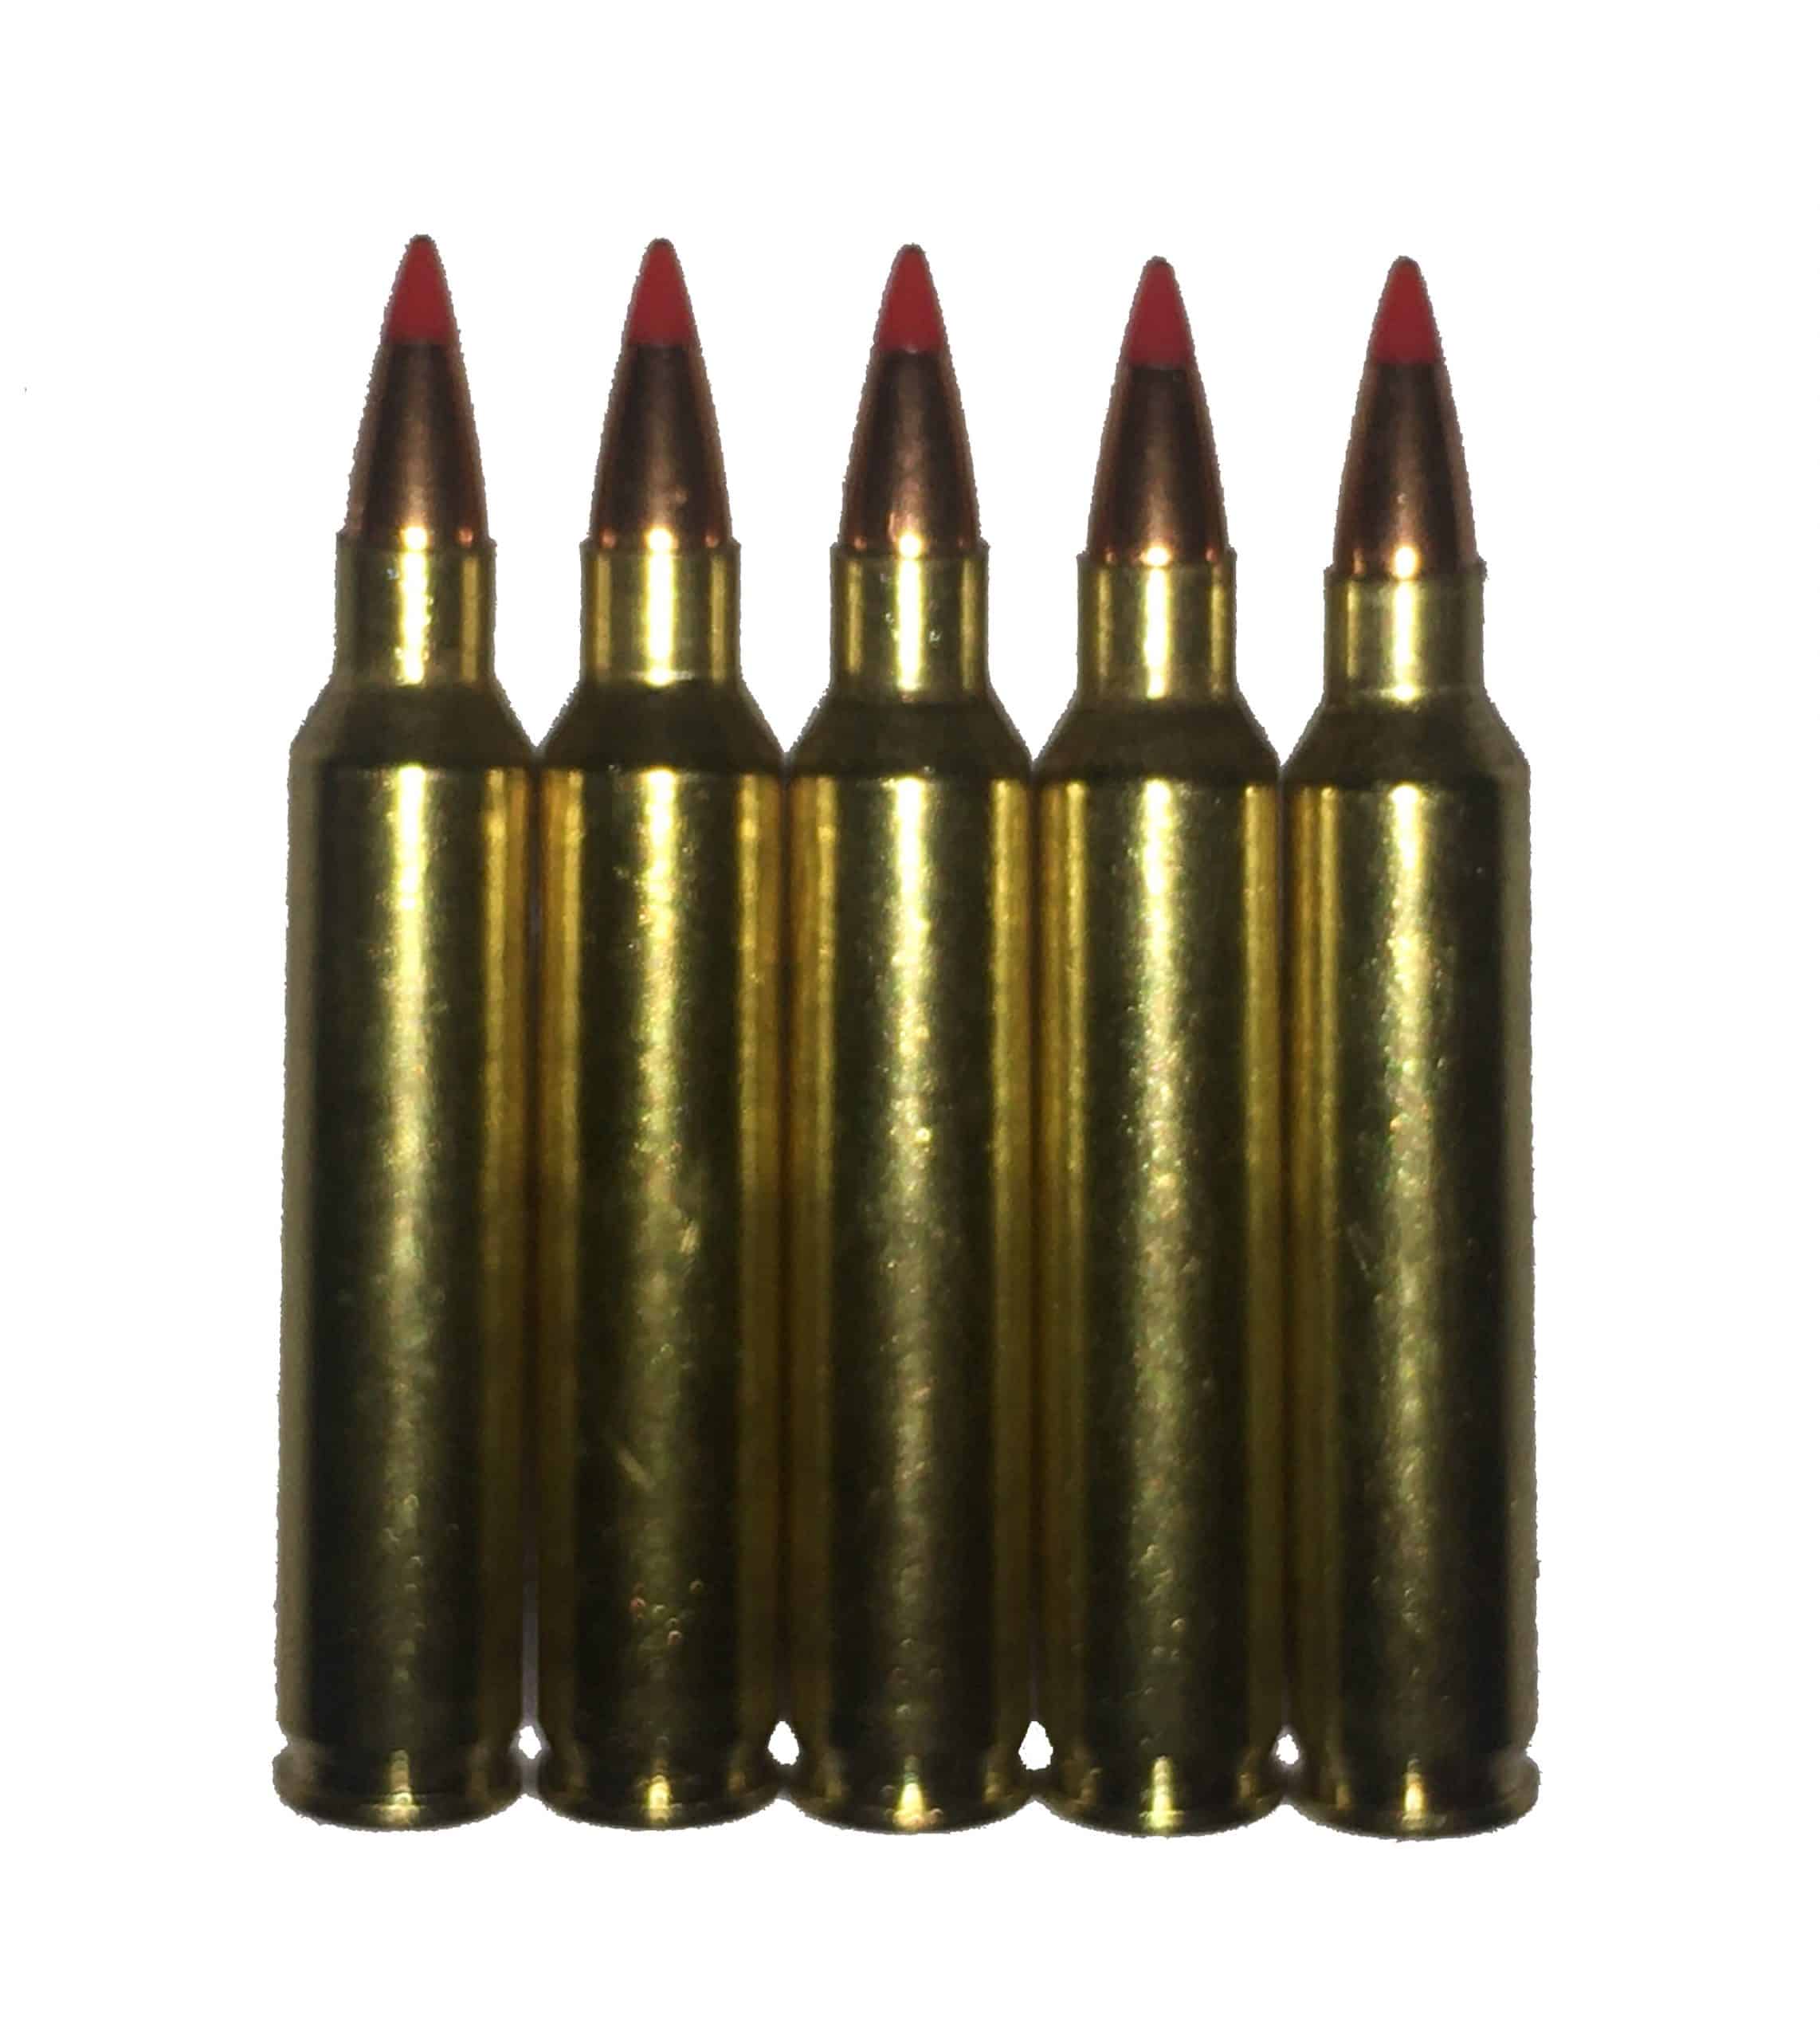 Five .204 Ruger Dummy Rounds